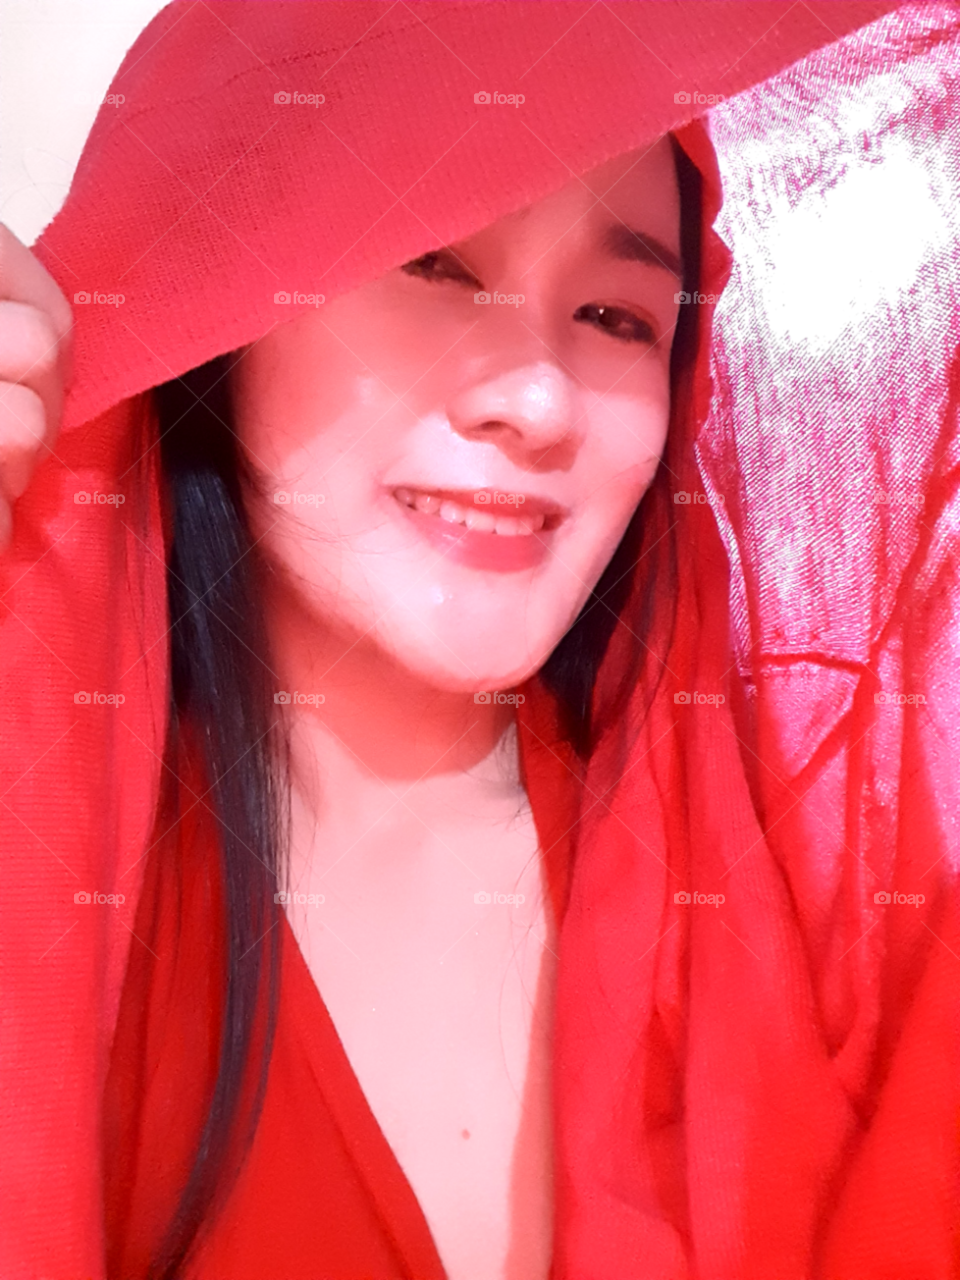 red is bright as bright as a smile.